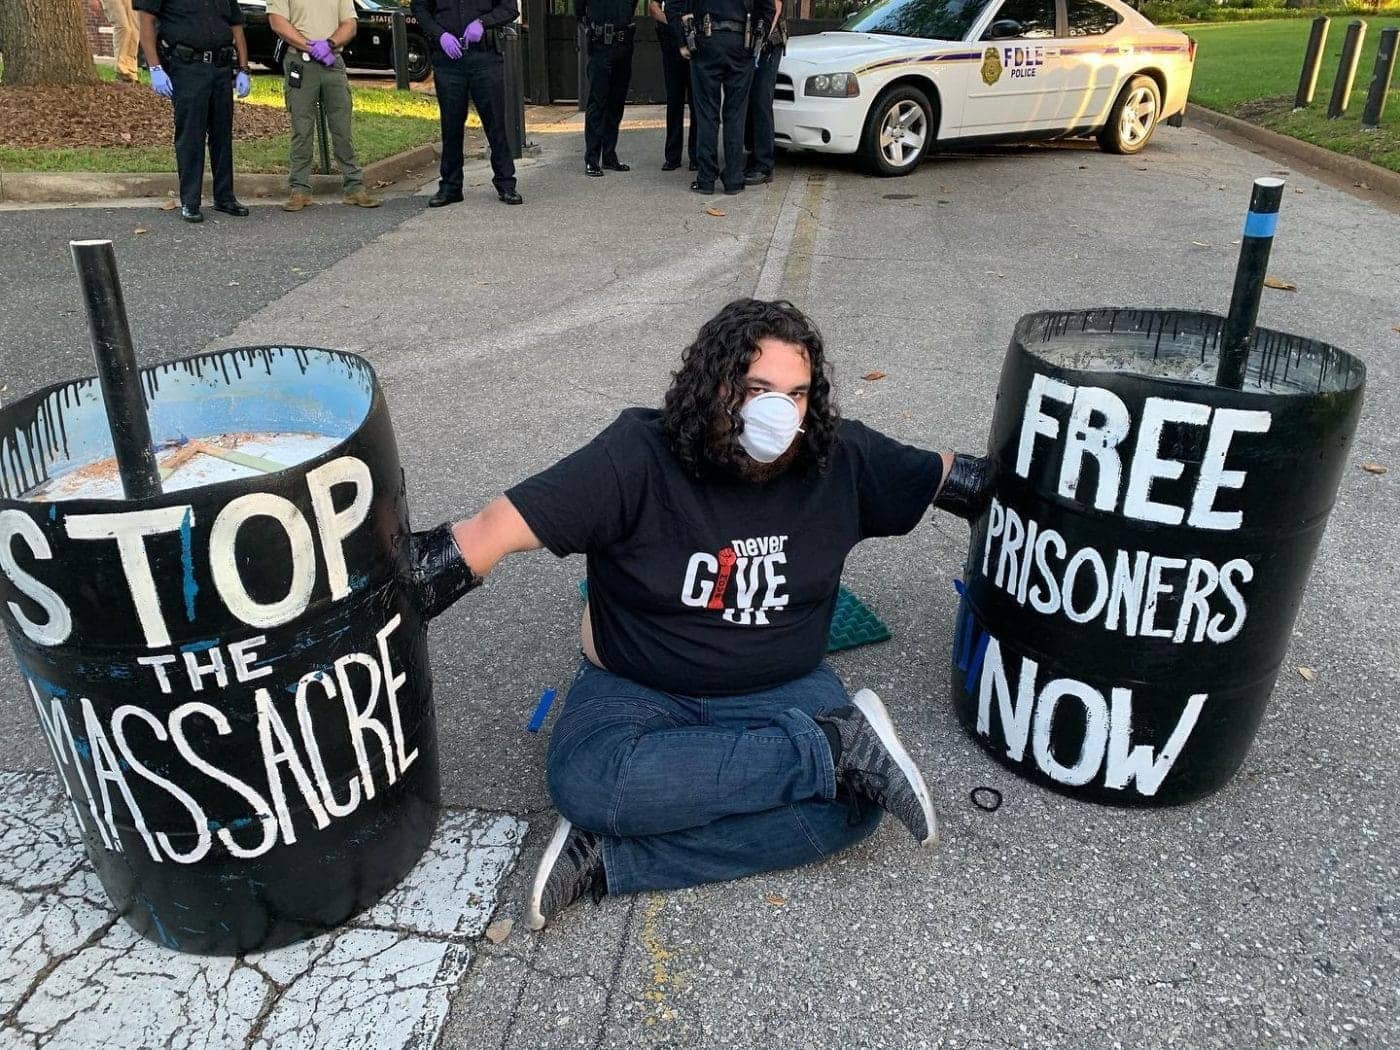 Protester-chained-to-barrels-in-front-of-Gov.-DeSantis’-mansion-demands-release-of-COVID-vulnerable-prisoners-041720-by-Fight-Toxic-Prisons-1400x1050, Protester chained to barrels in front of governor’s mansion demands release of prisoners at risk of COVID-19, Abolition Now! 